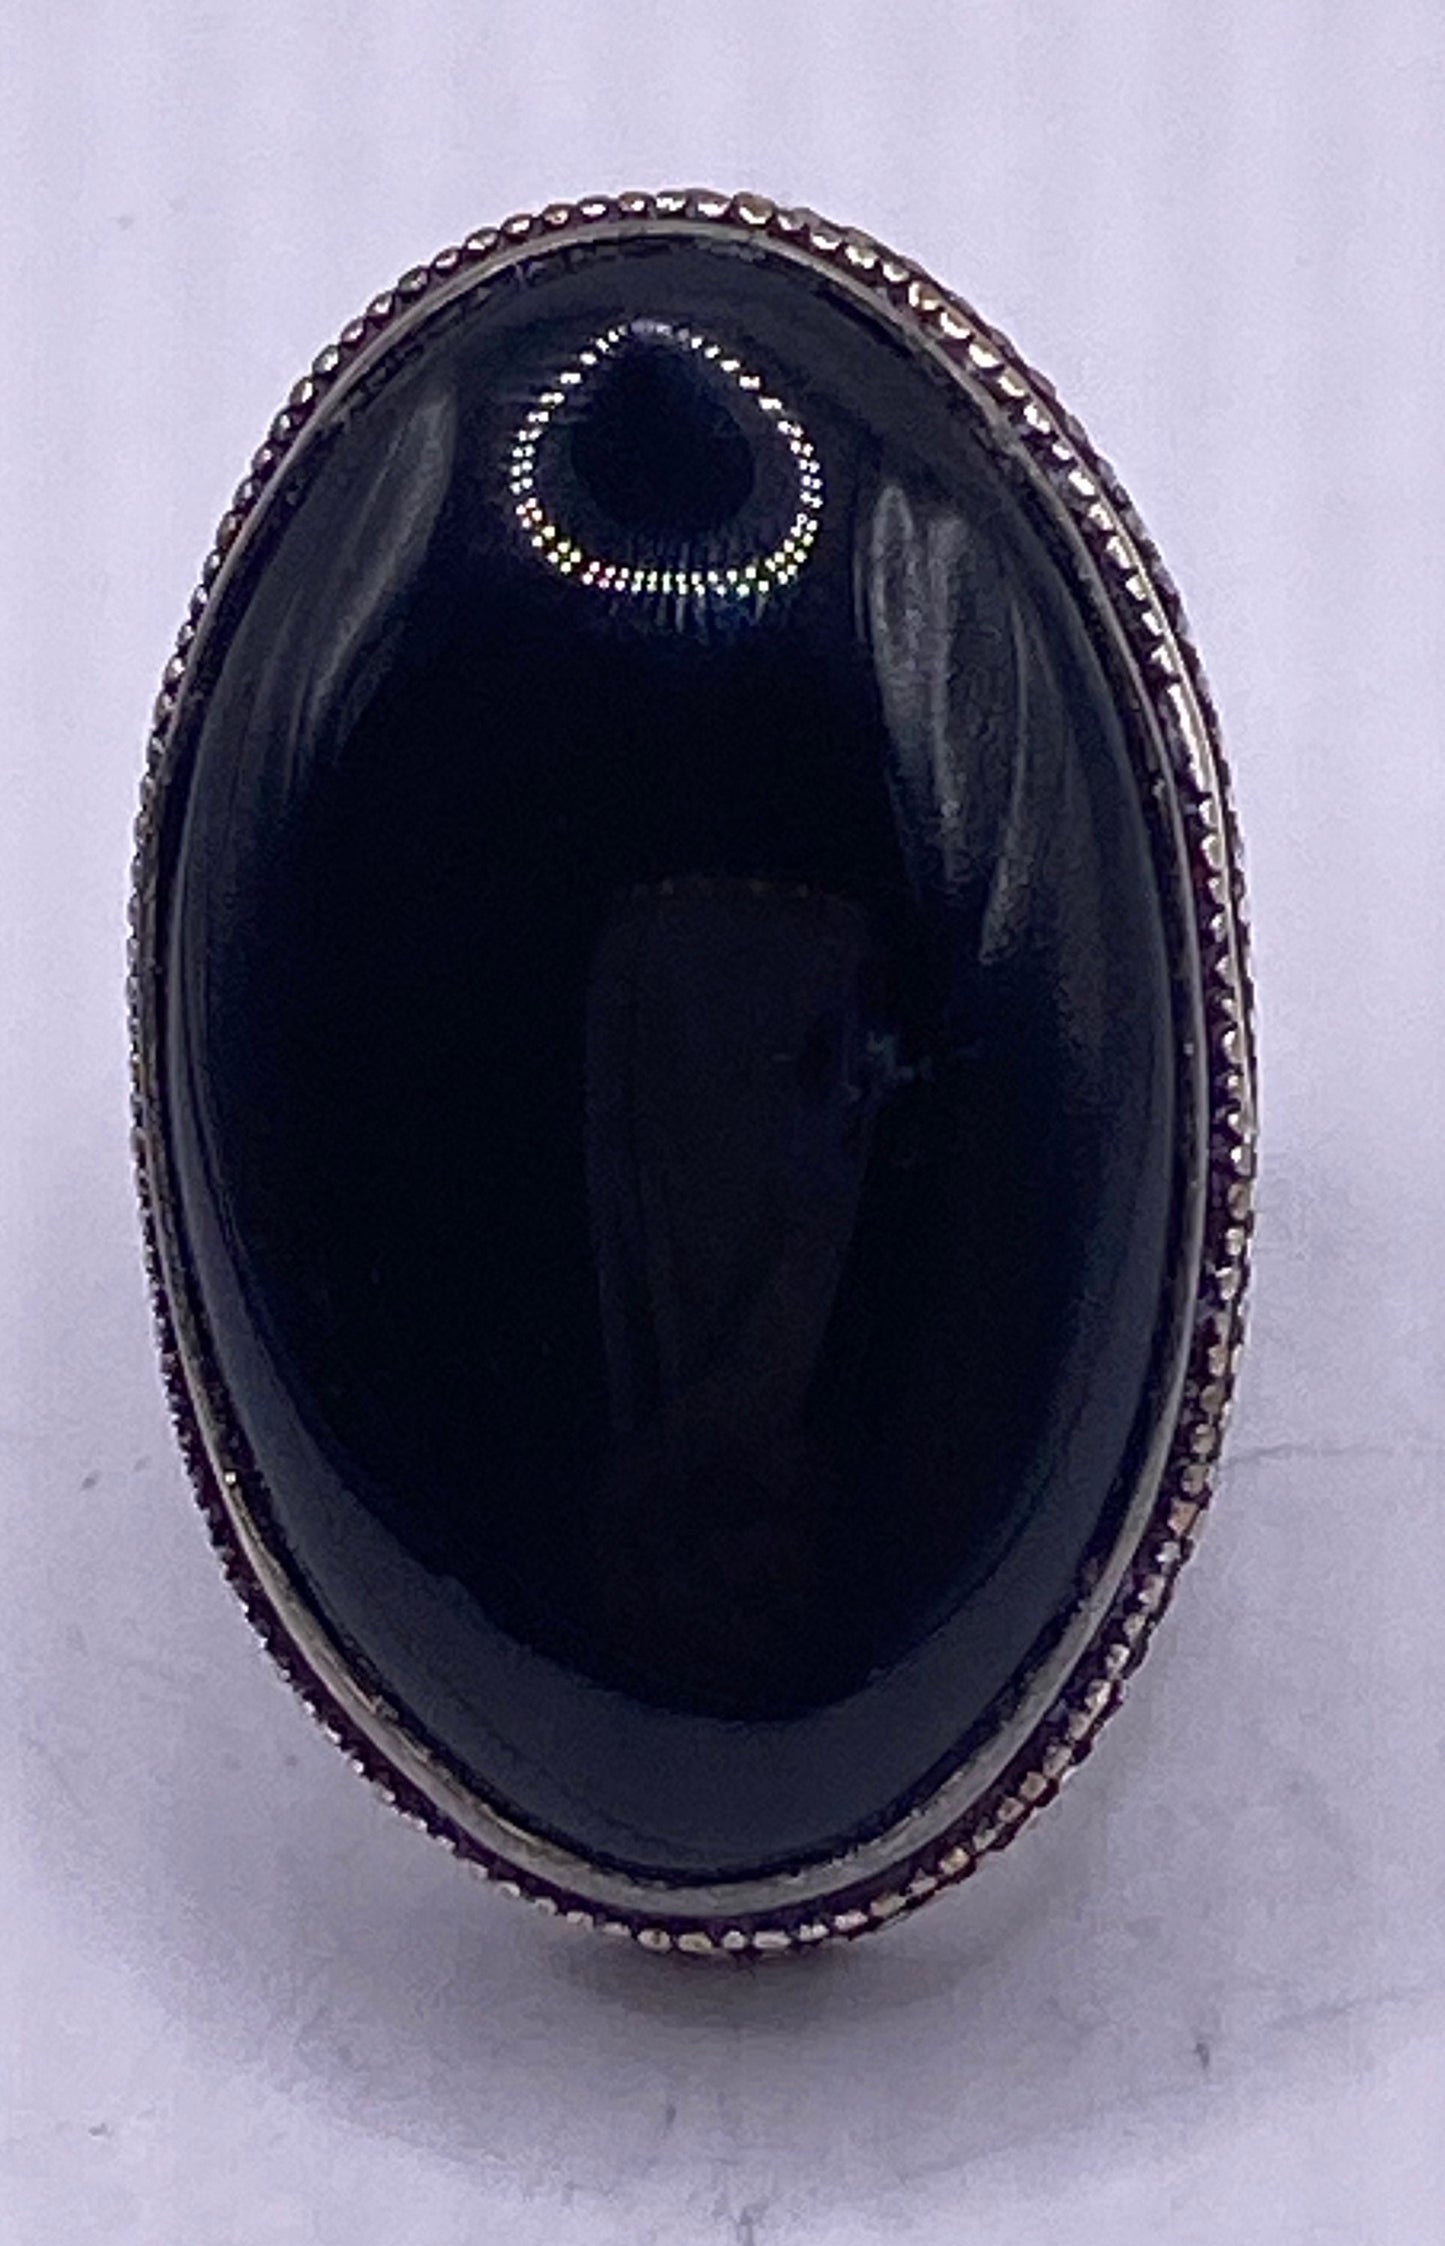 Vintage Black Onyx Silver Cocktail Ring Size 6.25